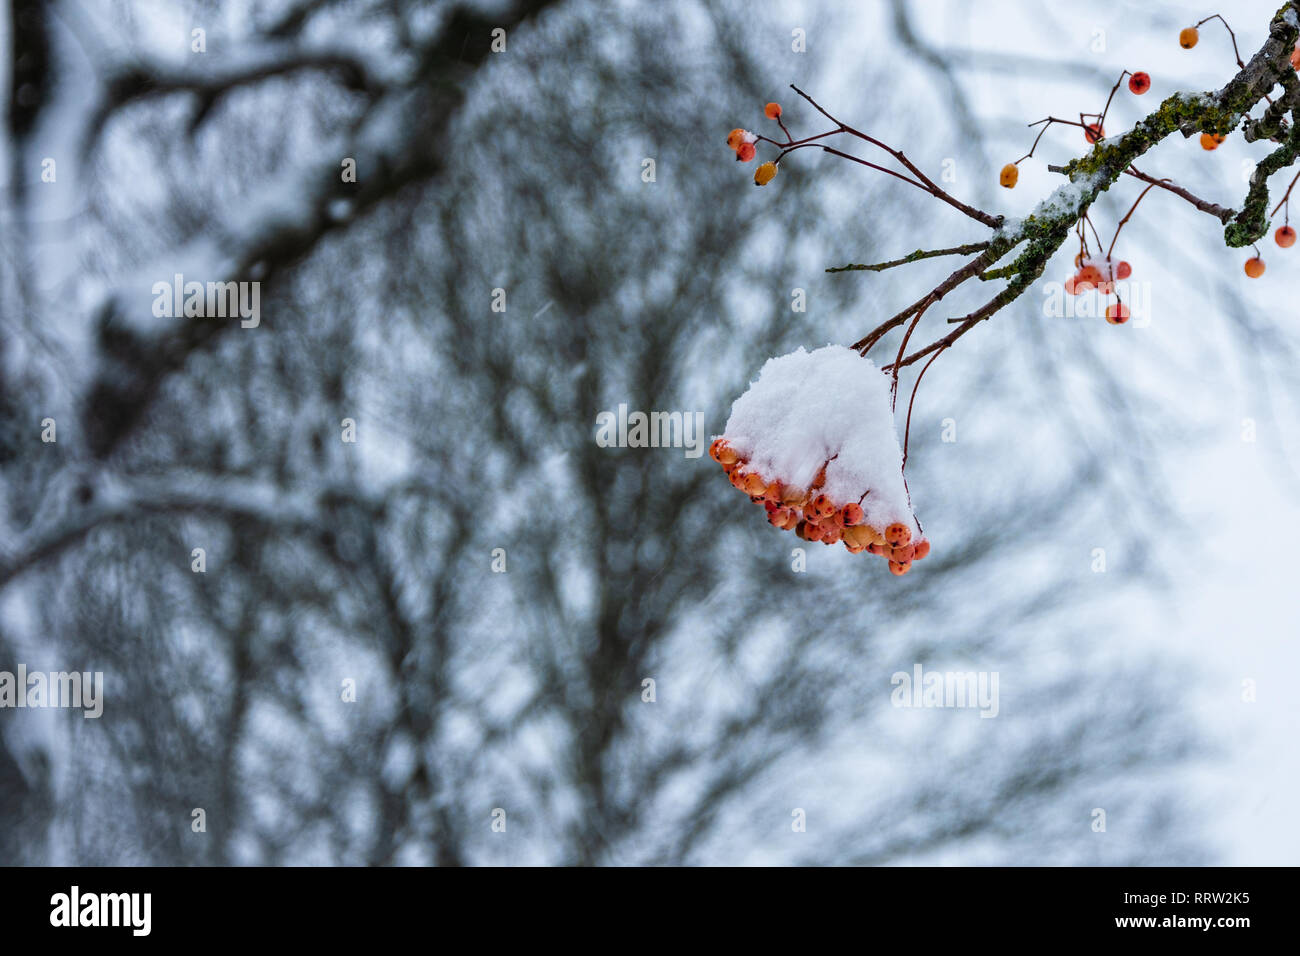 A cluster of red/orange berries from a Whitebeam (sorbus aria) tree covered in snow Stock Photo